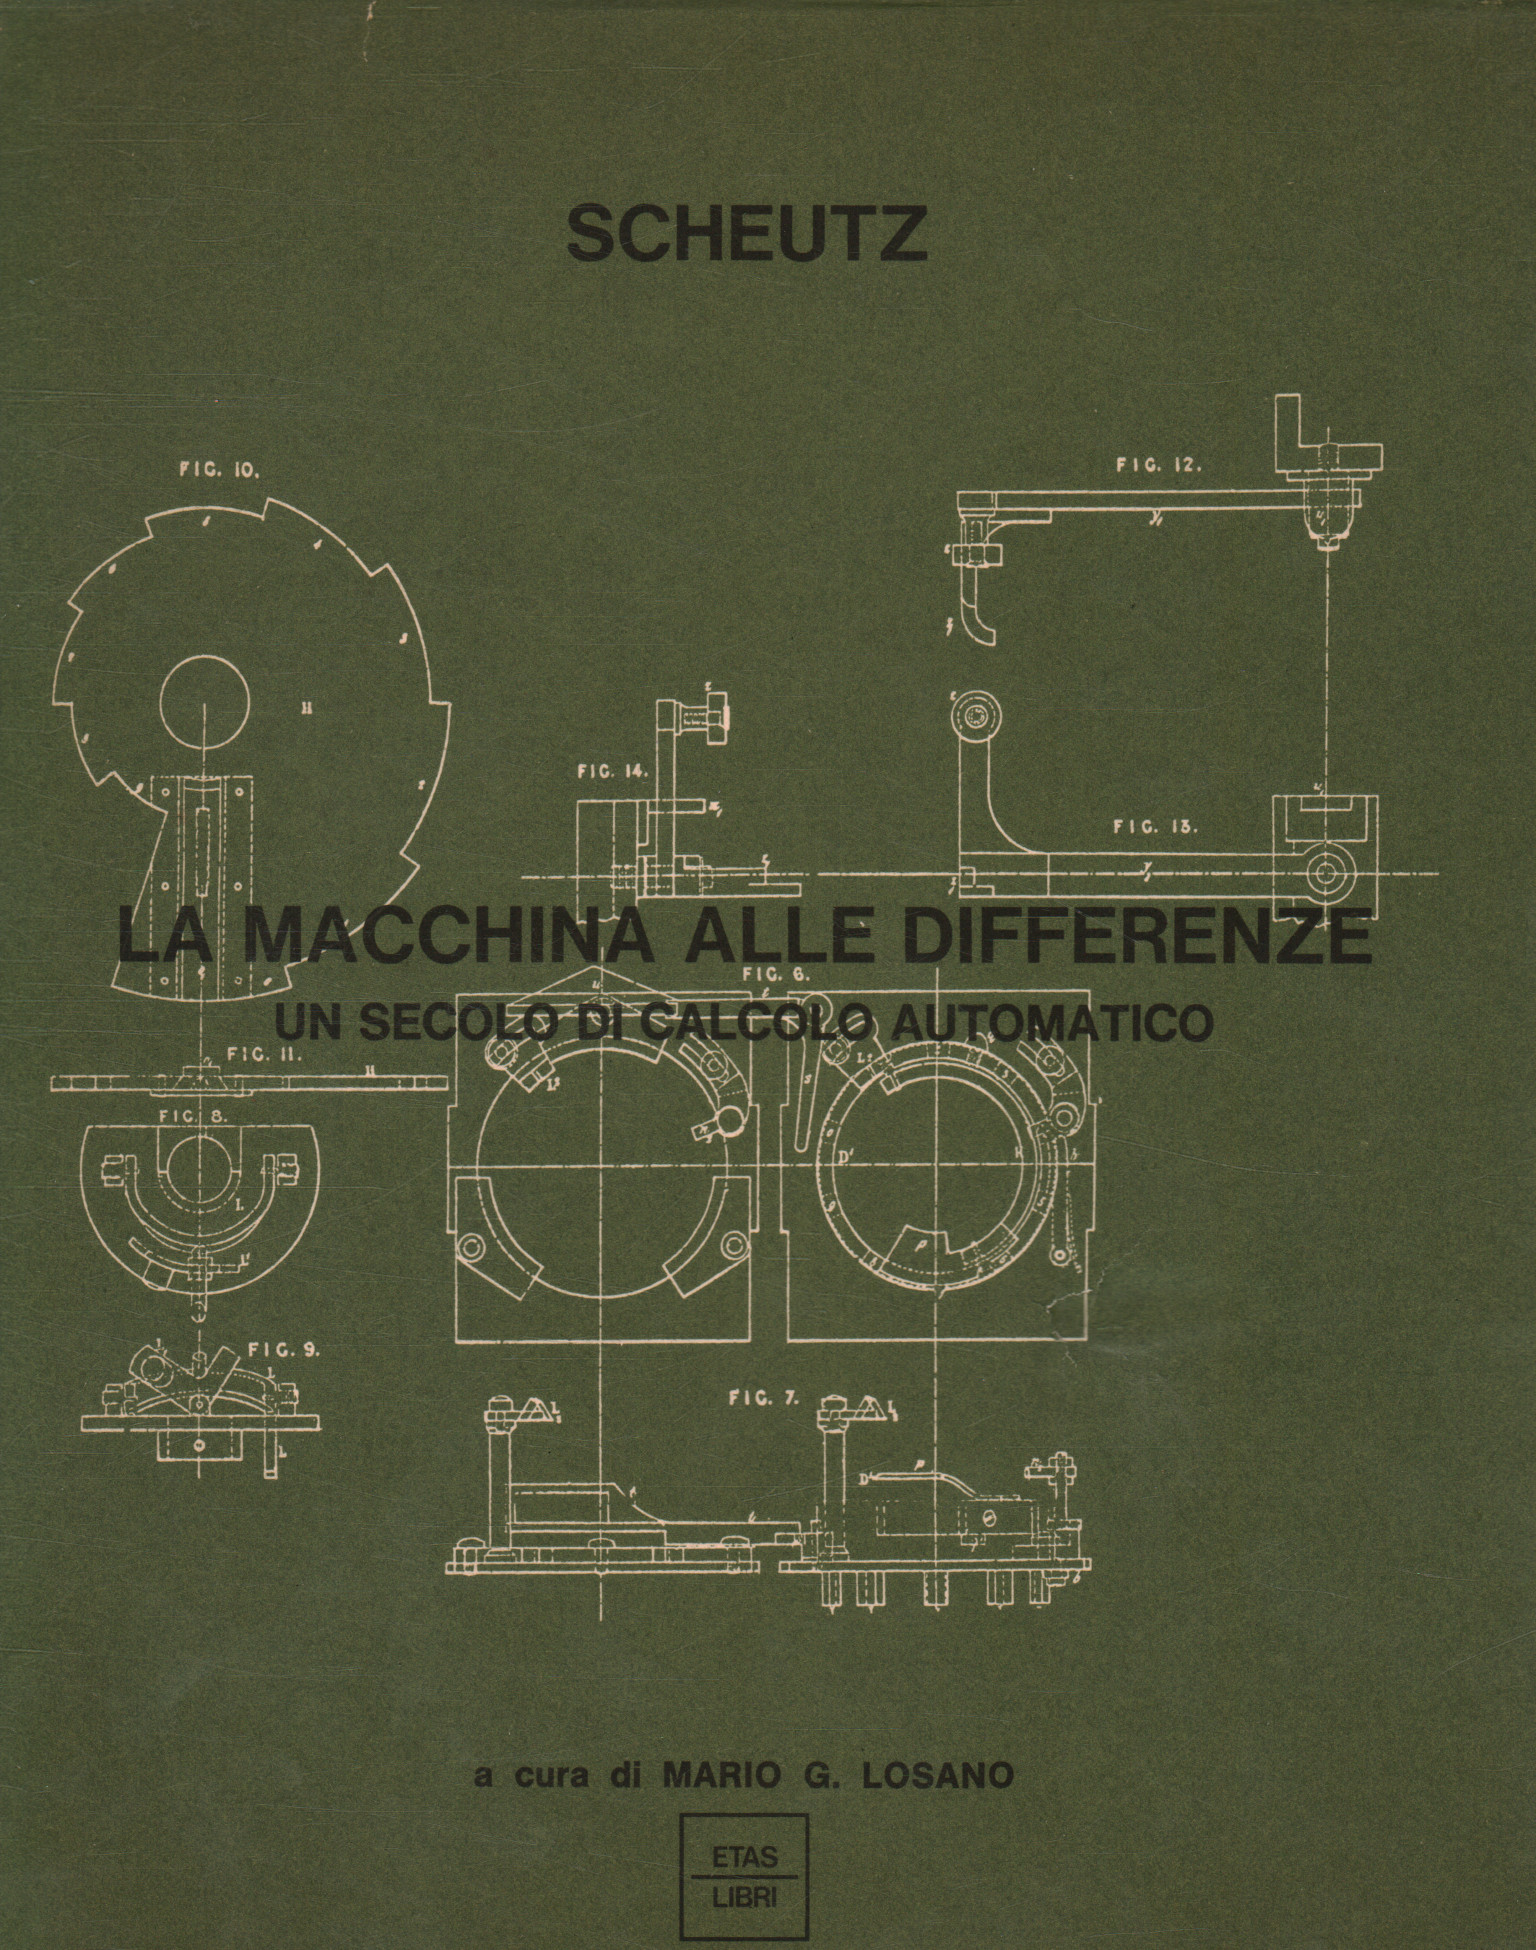 The difference machine